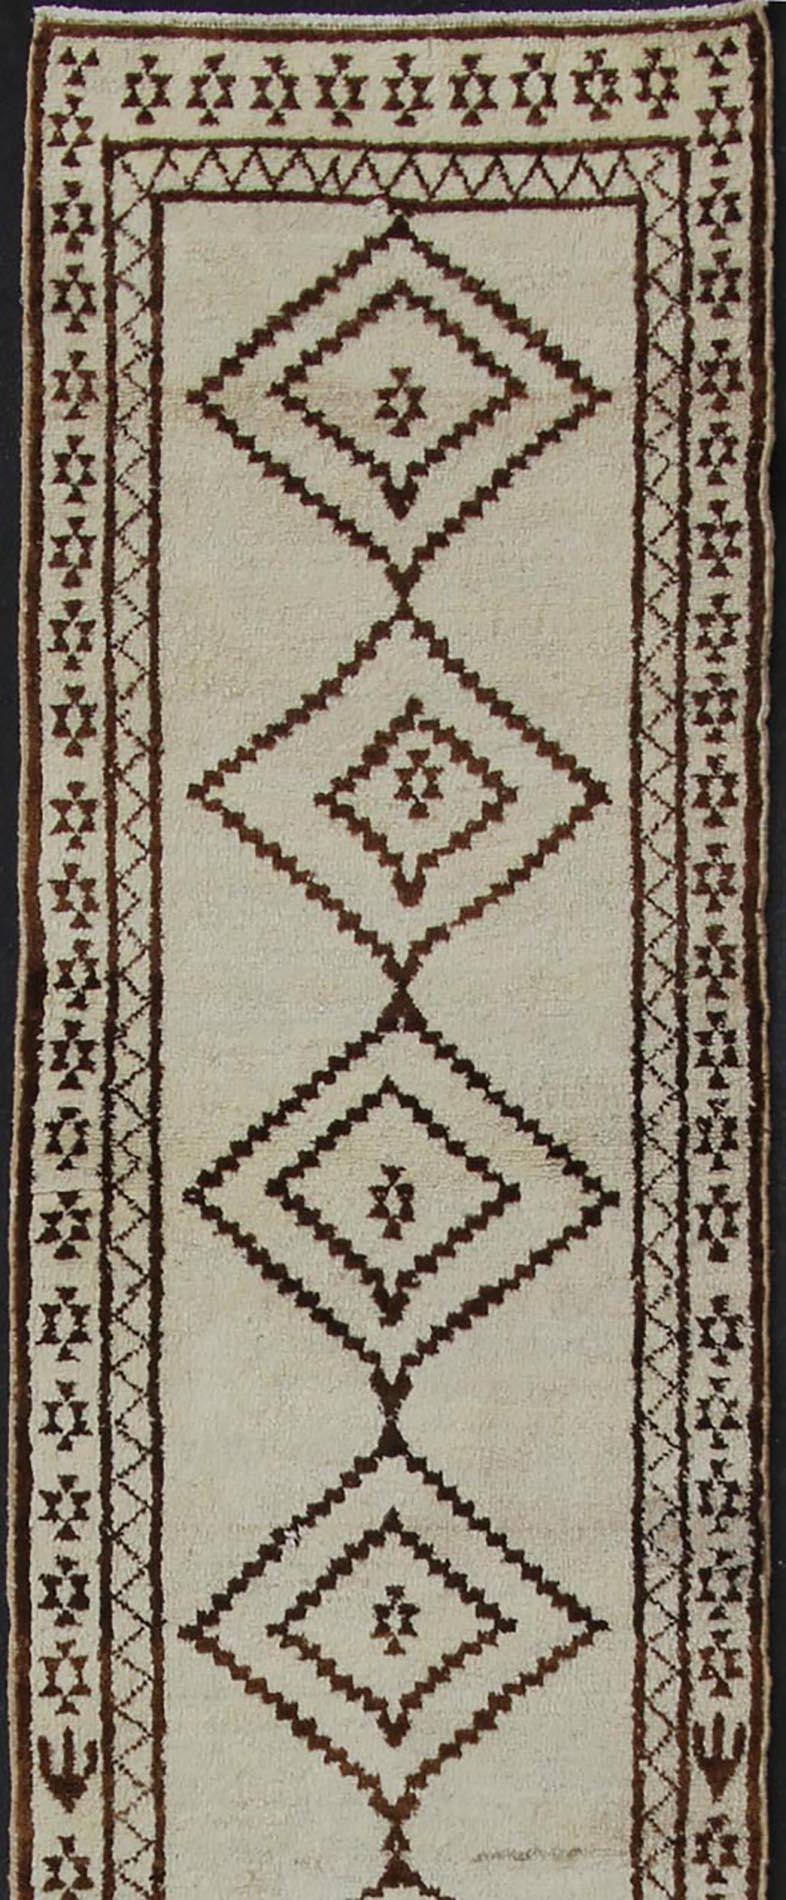 Tribal Moroccan Design long runner, Turkish Tulu vintage runner in cream, brown and earth tones with Tribal diamond design, rug EN-179013, country of origin / type: Turkey / Tulu, circa 1960

This unique Turkish Tulu runner features a graphic